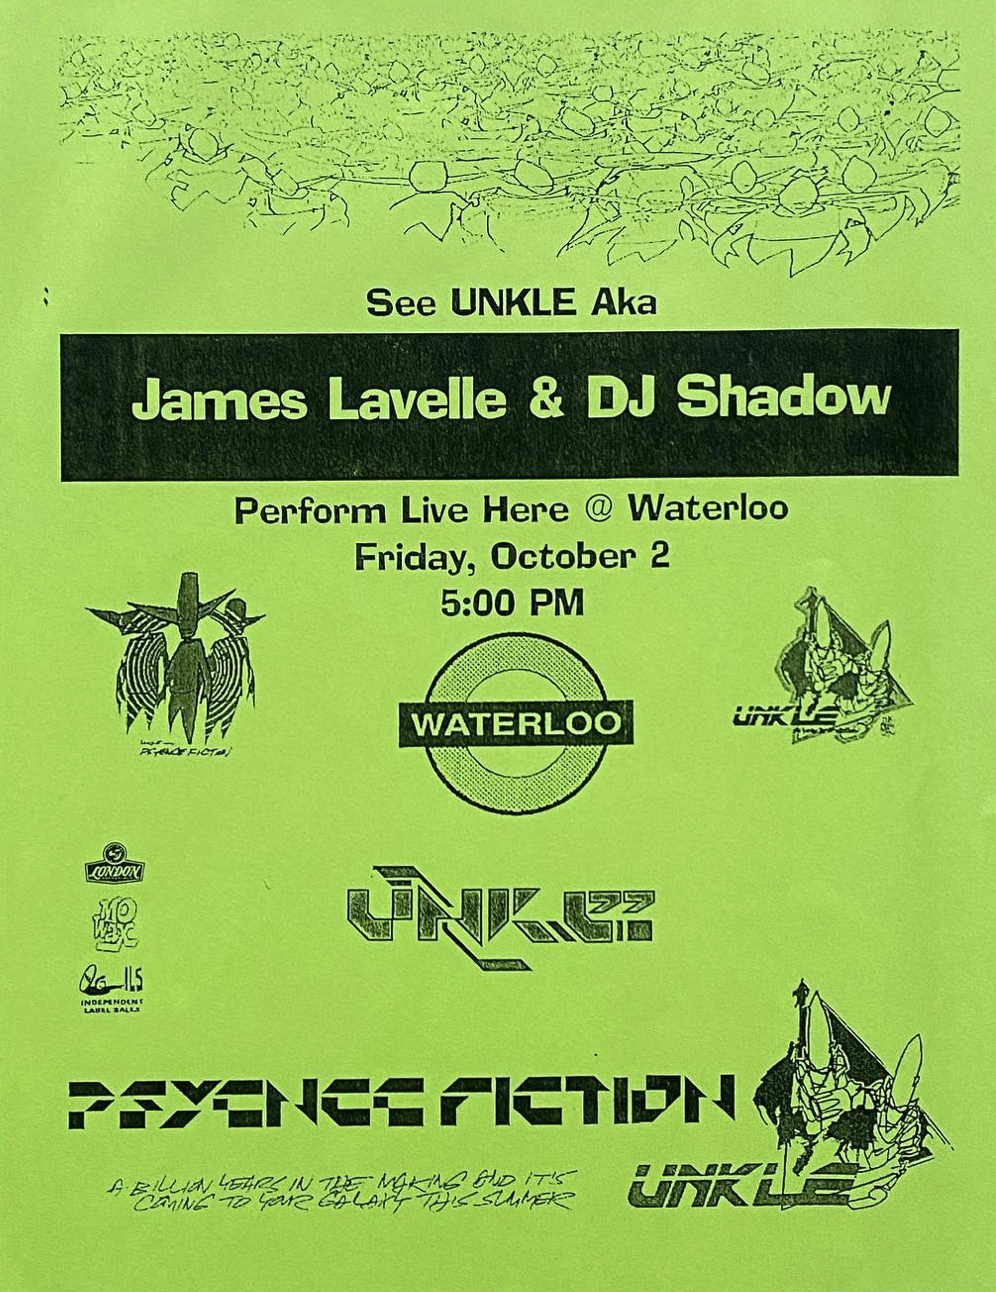 Flyer for 2 Oct 1998 event at Waterloo Records